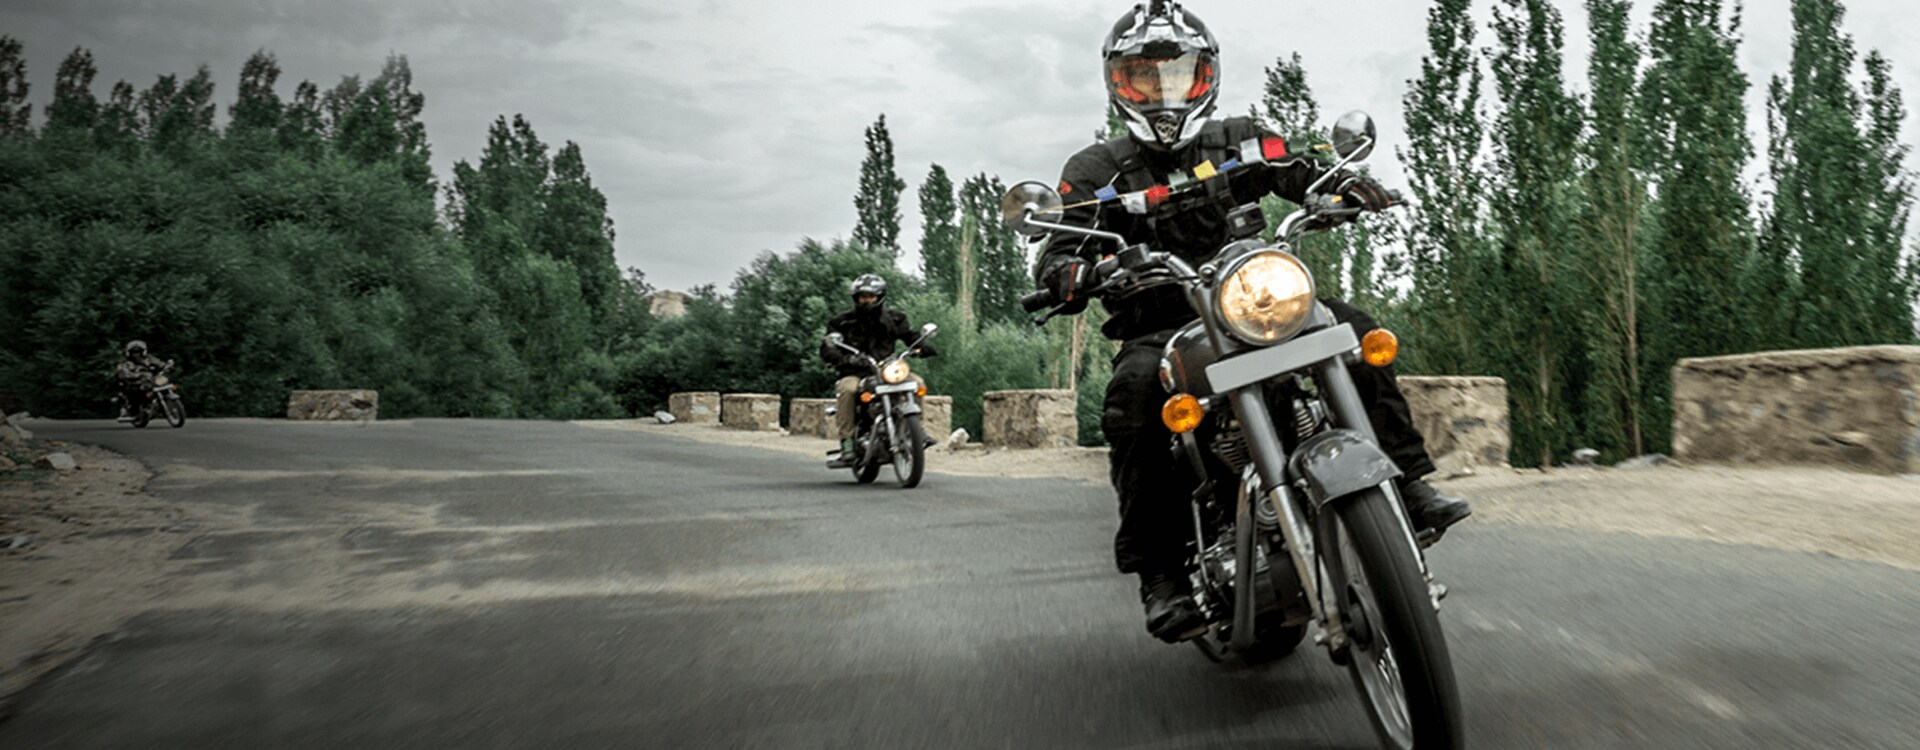 Bullet 500 On Road Reliability